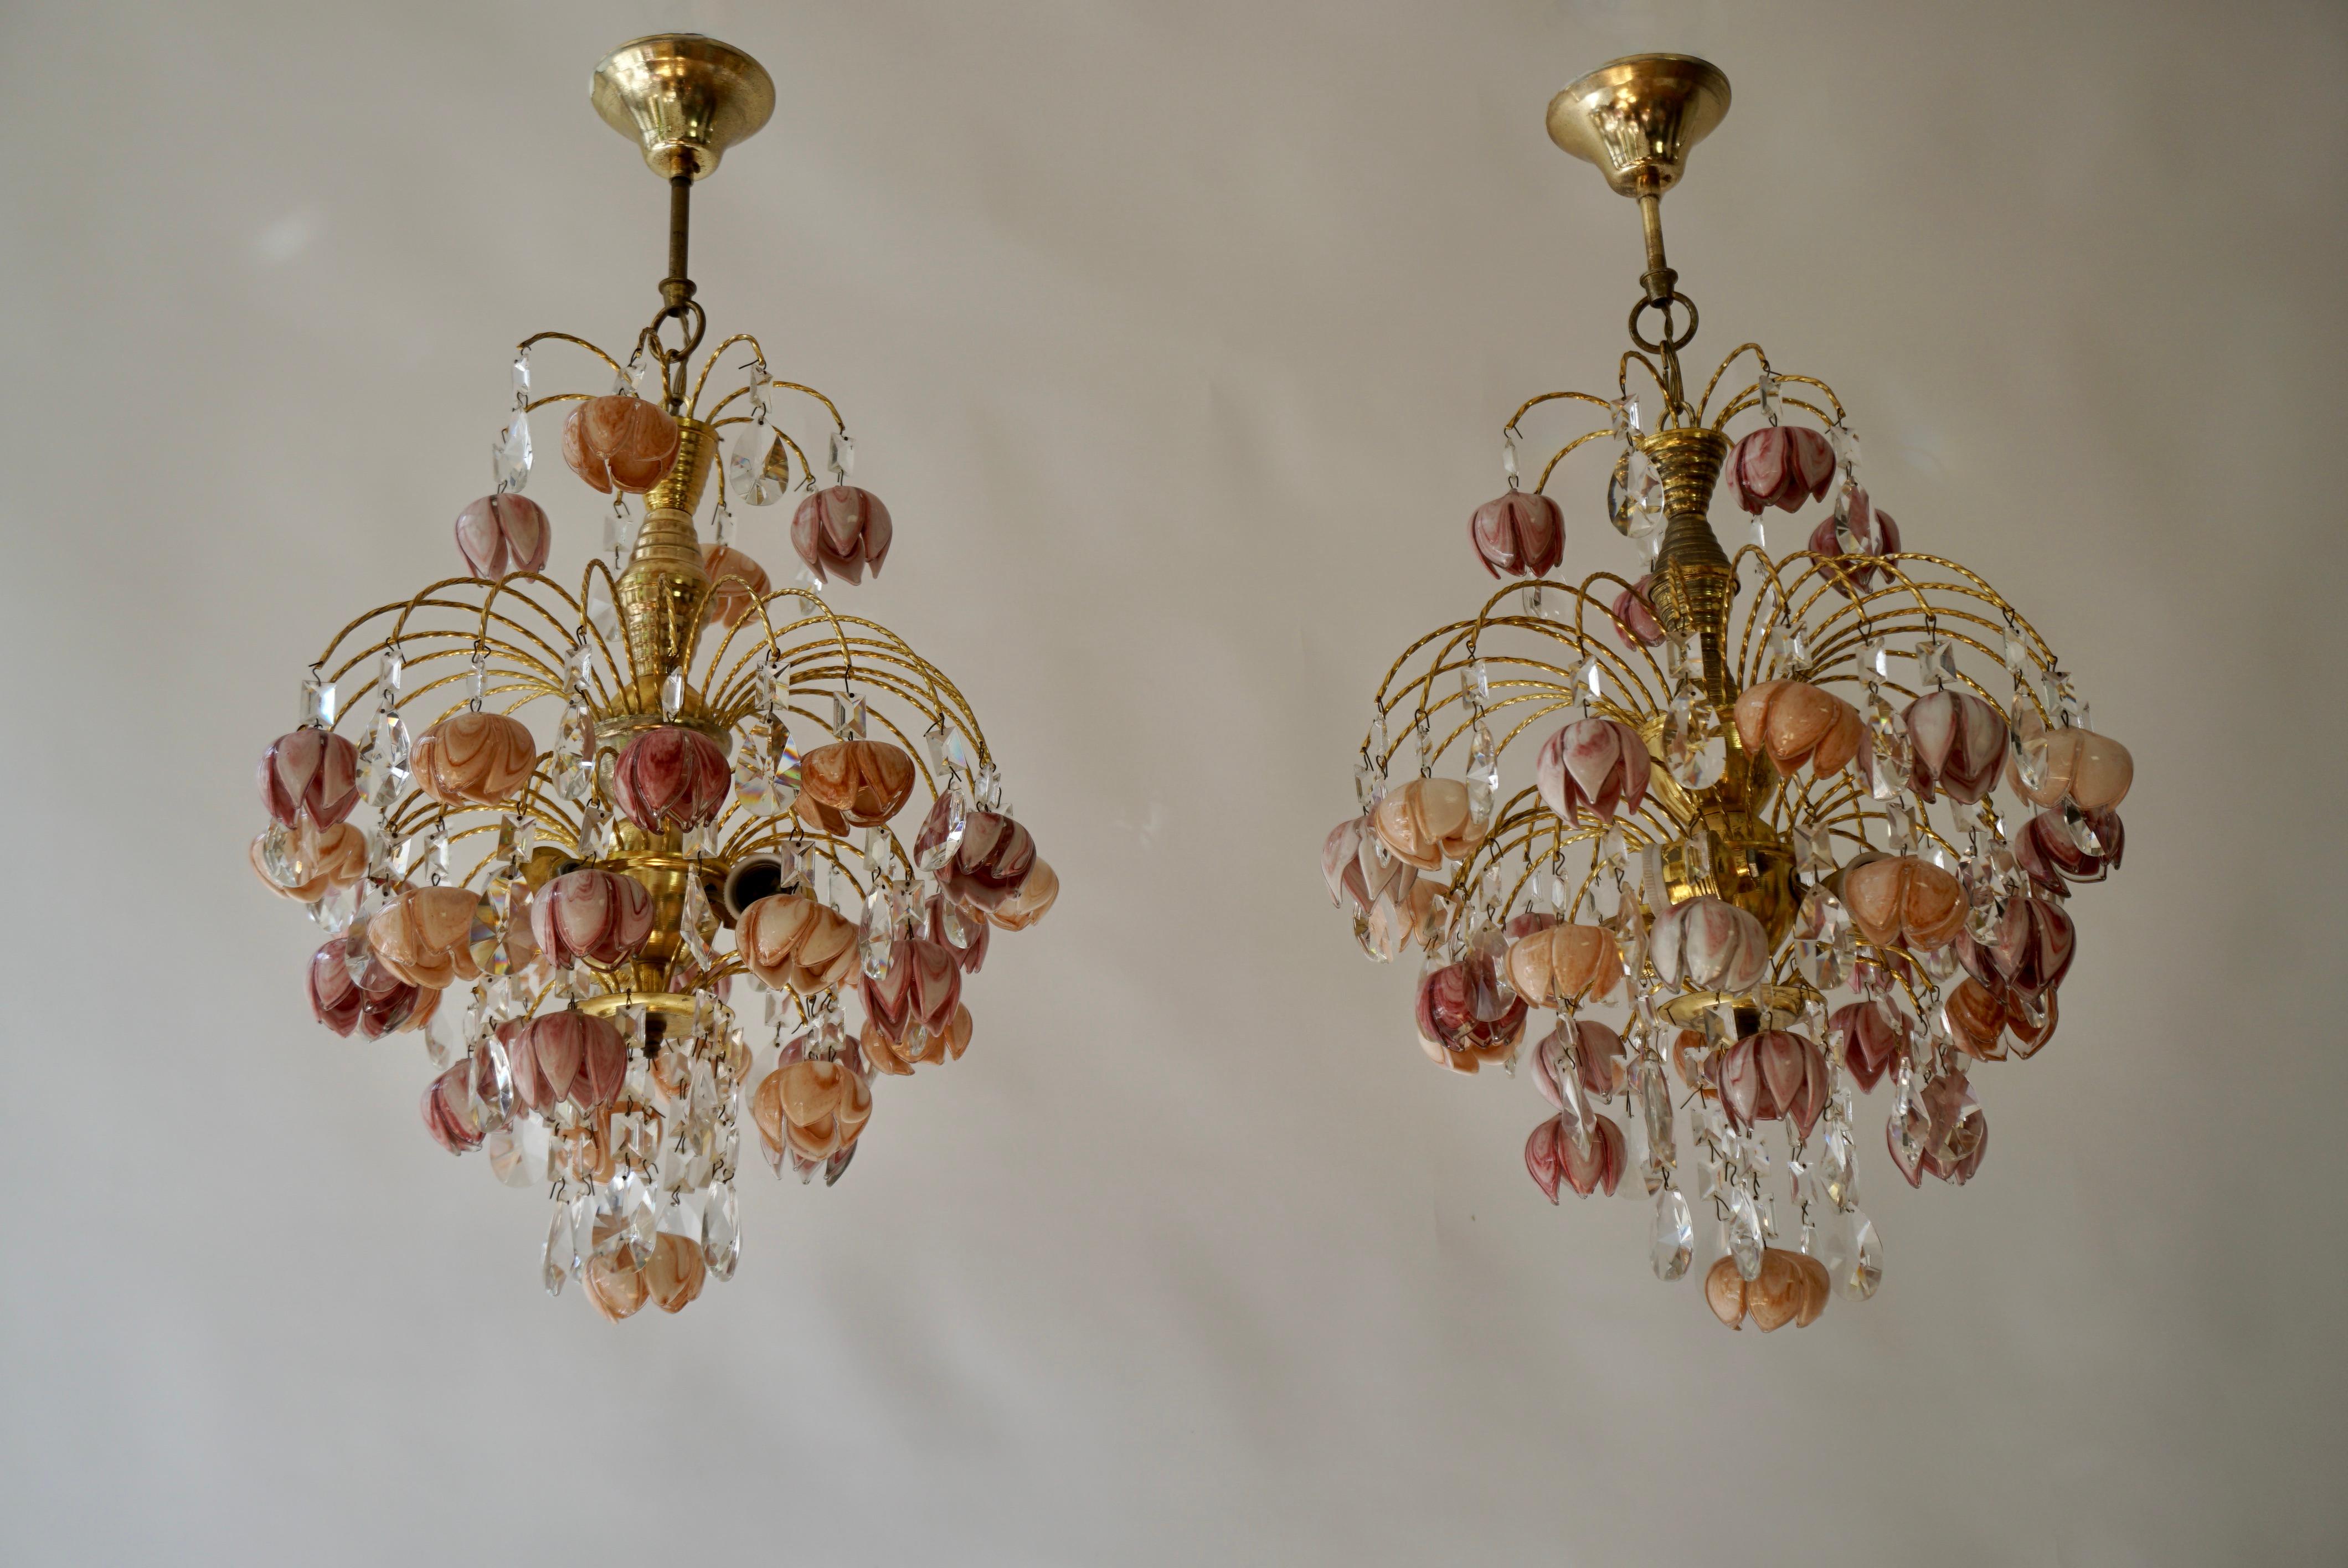 Pair of Murano Glass Floral Chandeliers, Italy, 1970s For Sale 10